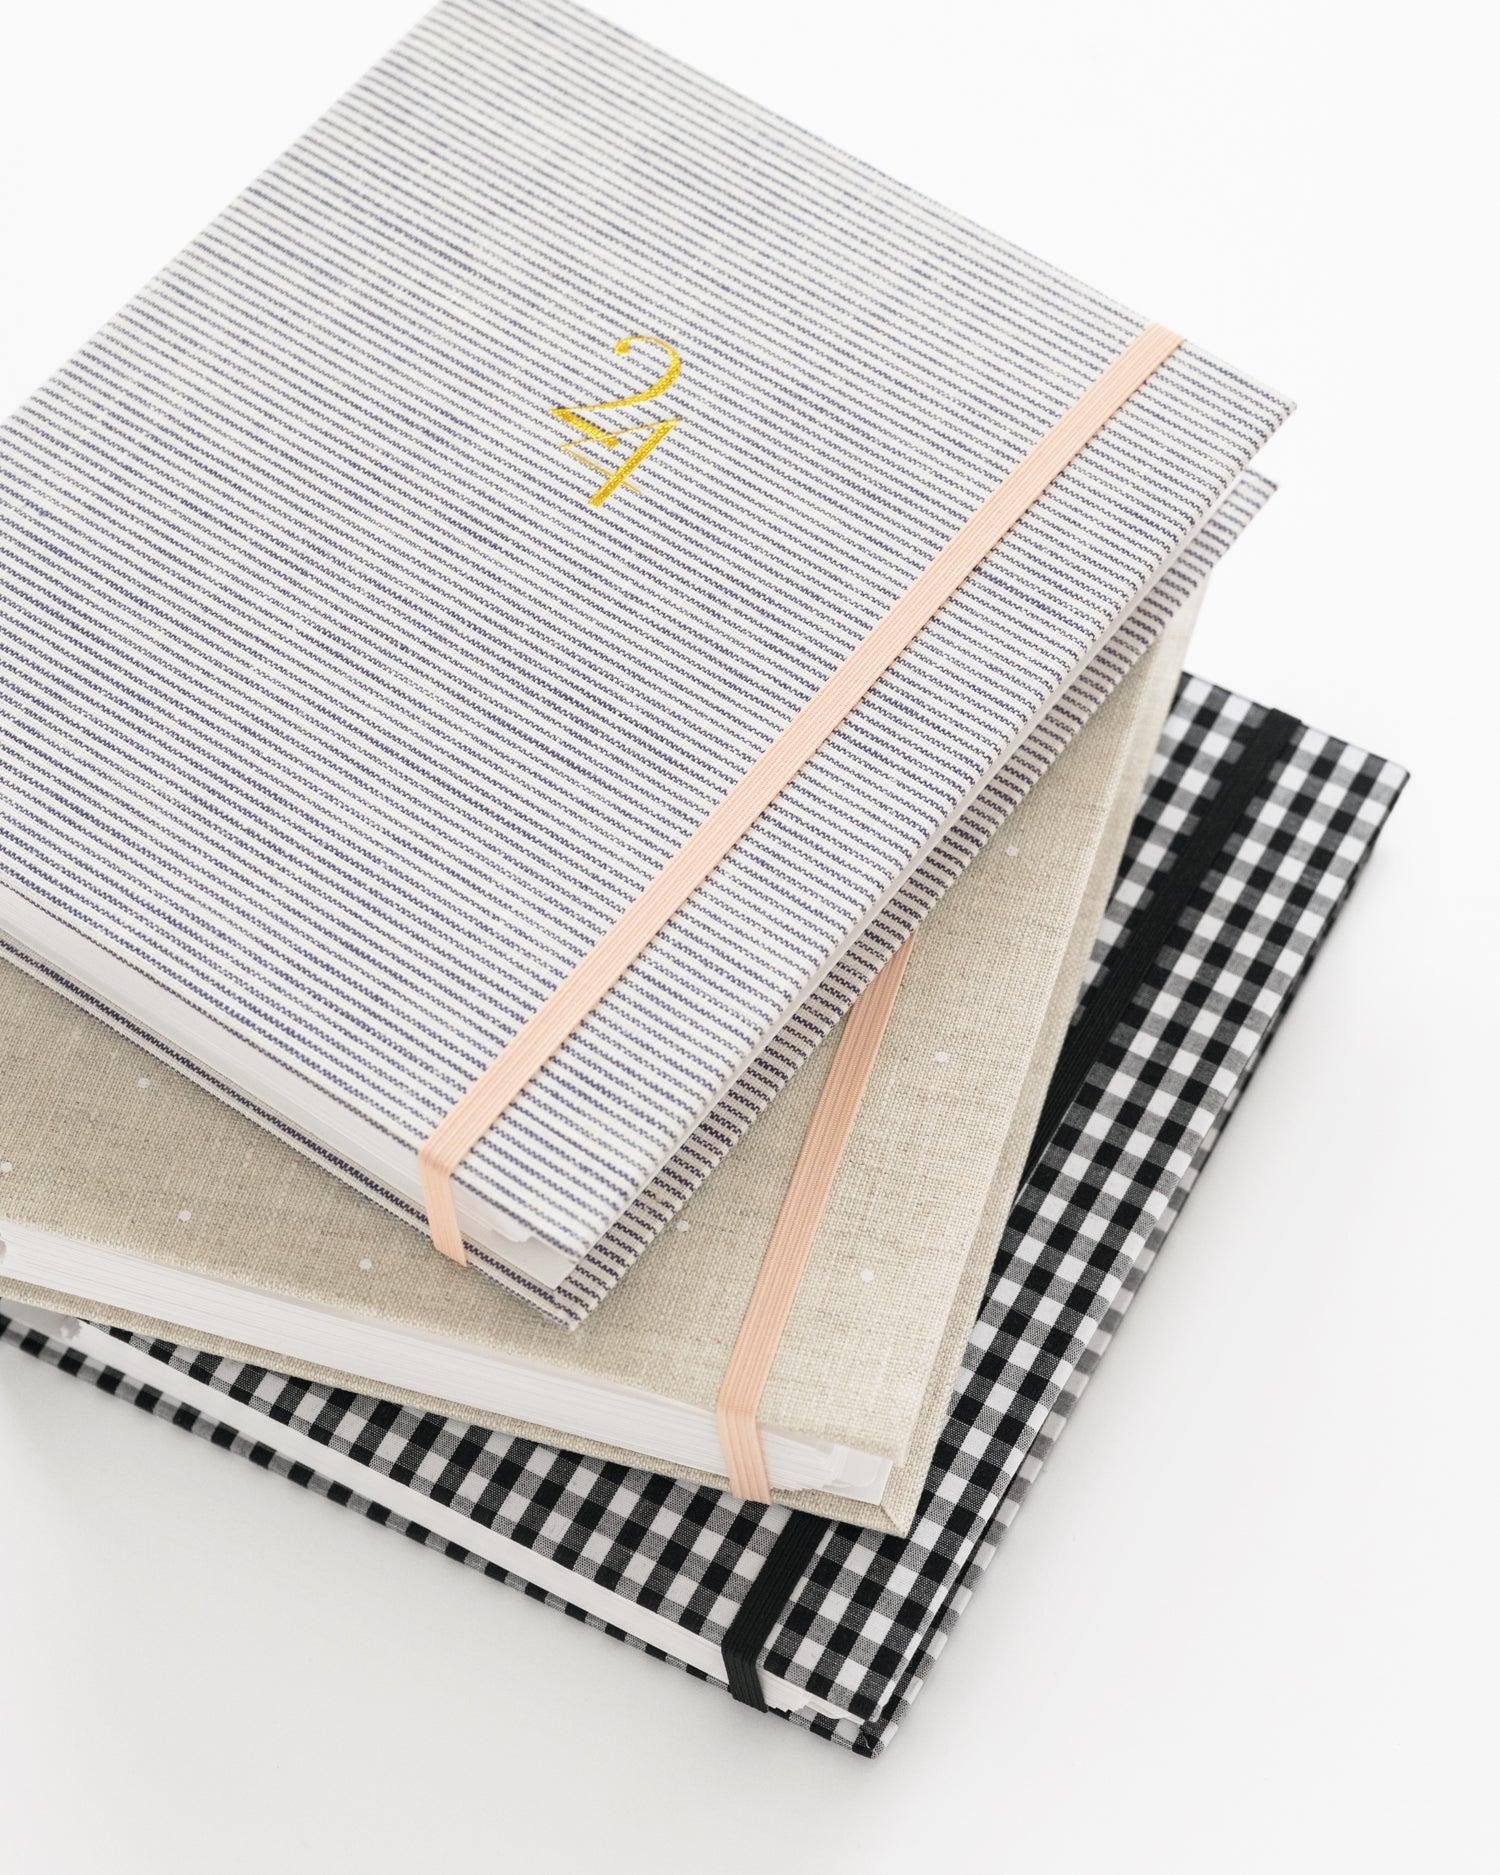 Stack of concealed planners with different fabrics